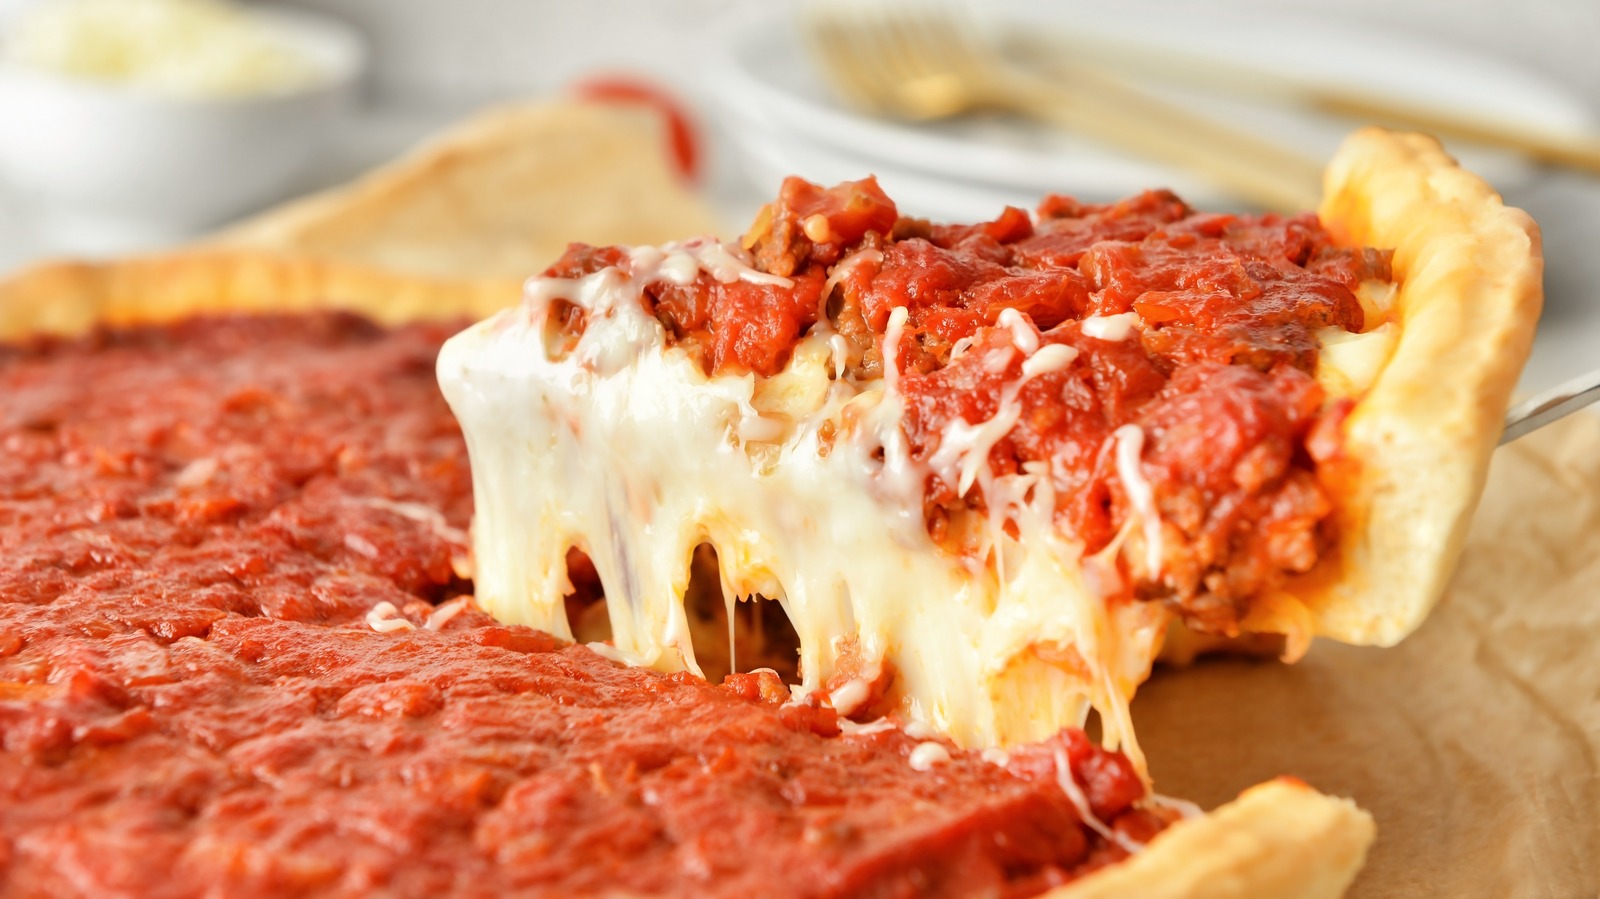 https://www.thedailymeal.com/img/gallery/a-beginners-guide-to-chicago-deep-dish-pizza/l-intro-1682875239.jpg